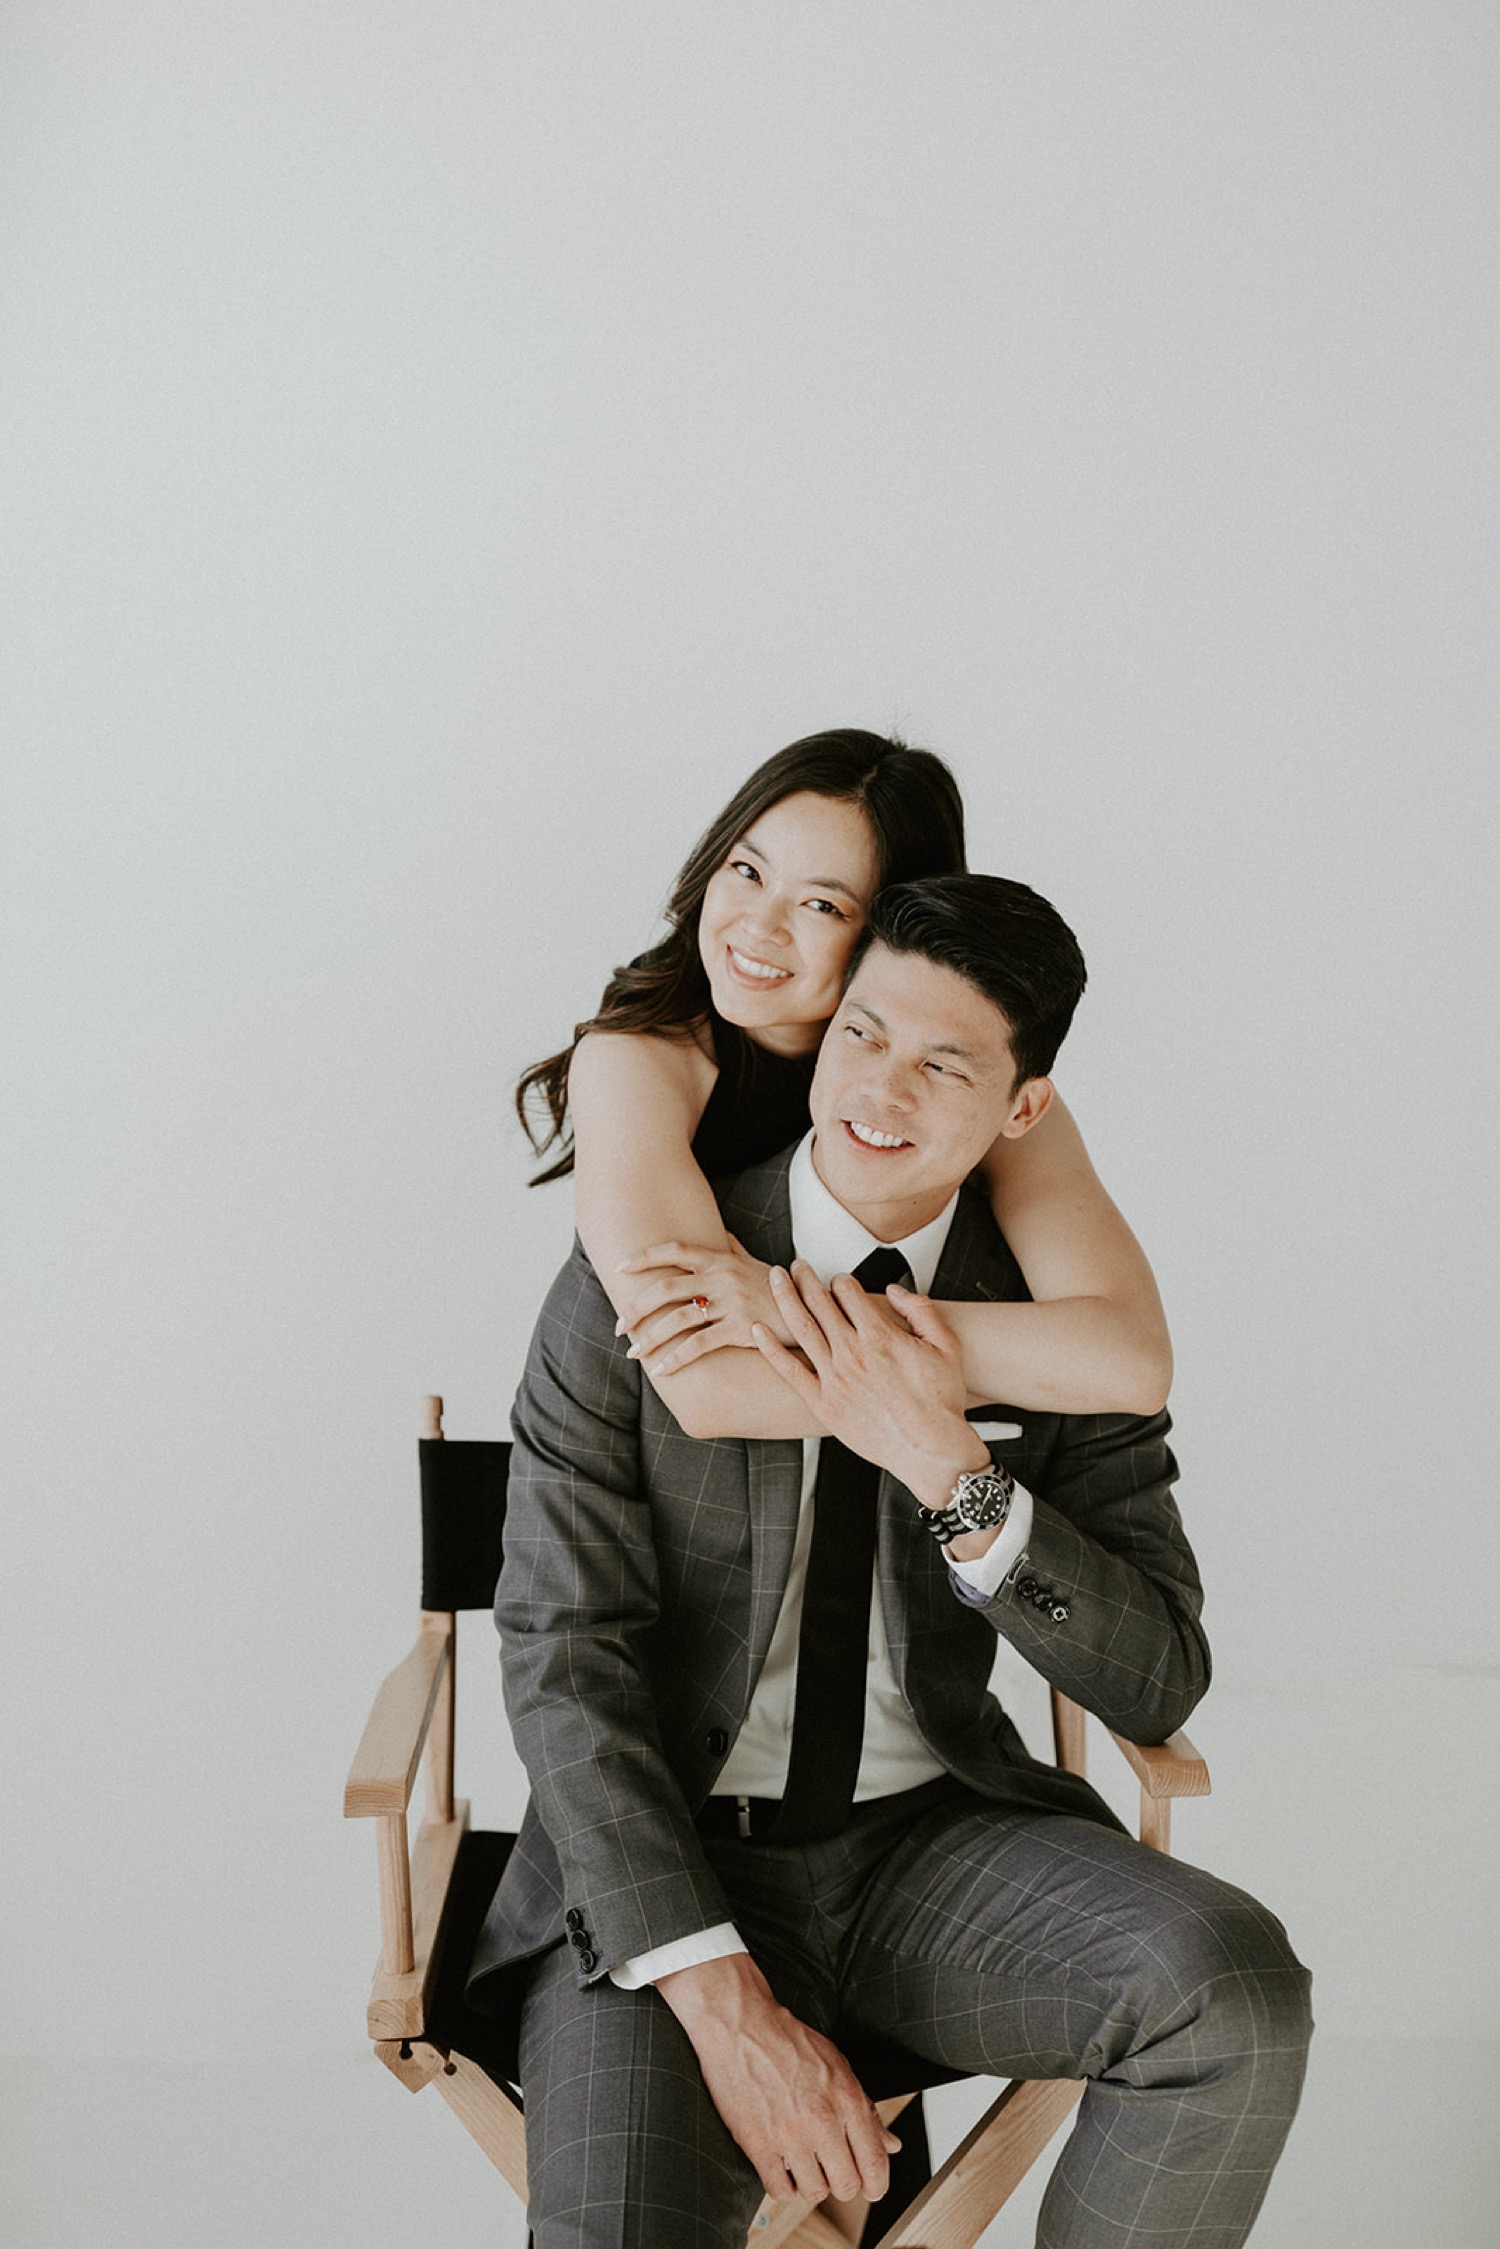 Just Engaged? Here are some fall and winter engagement photos for inspo